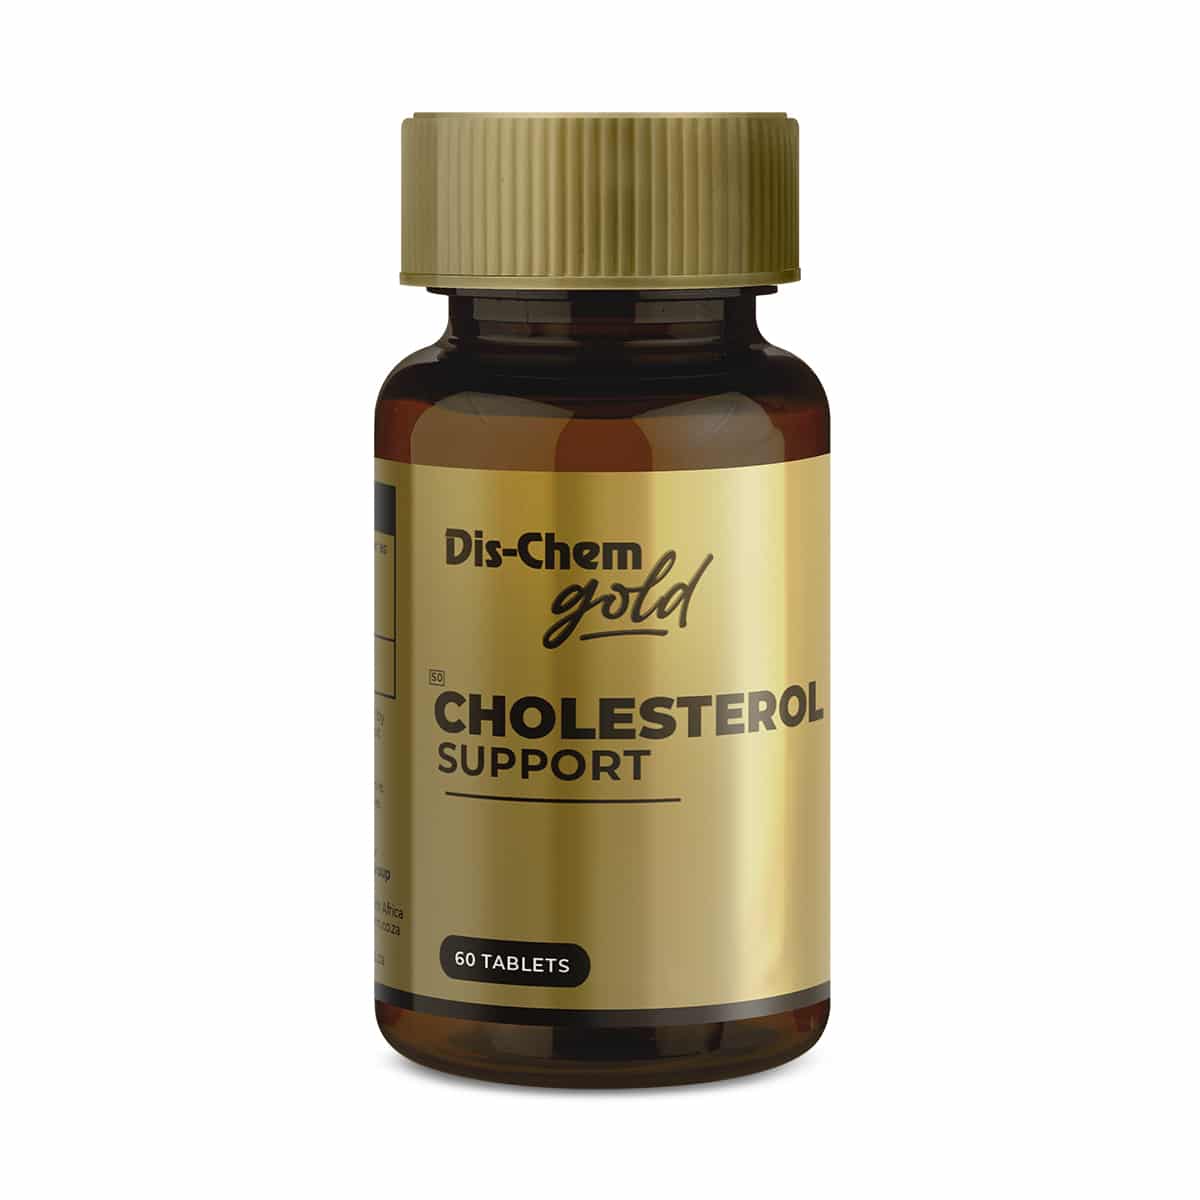 Dis-Chem Gold Cholesterol Support - 60 Tabs